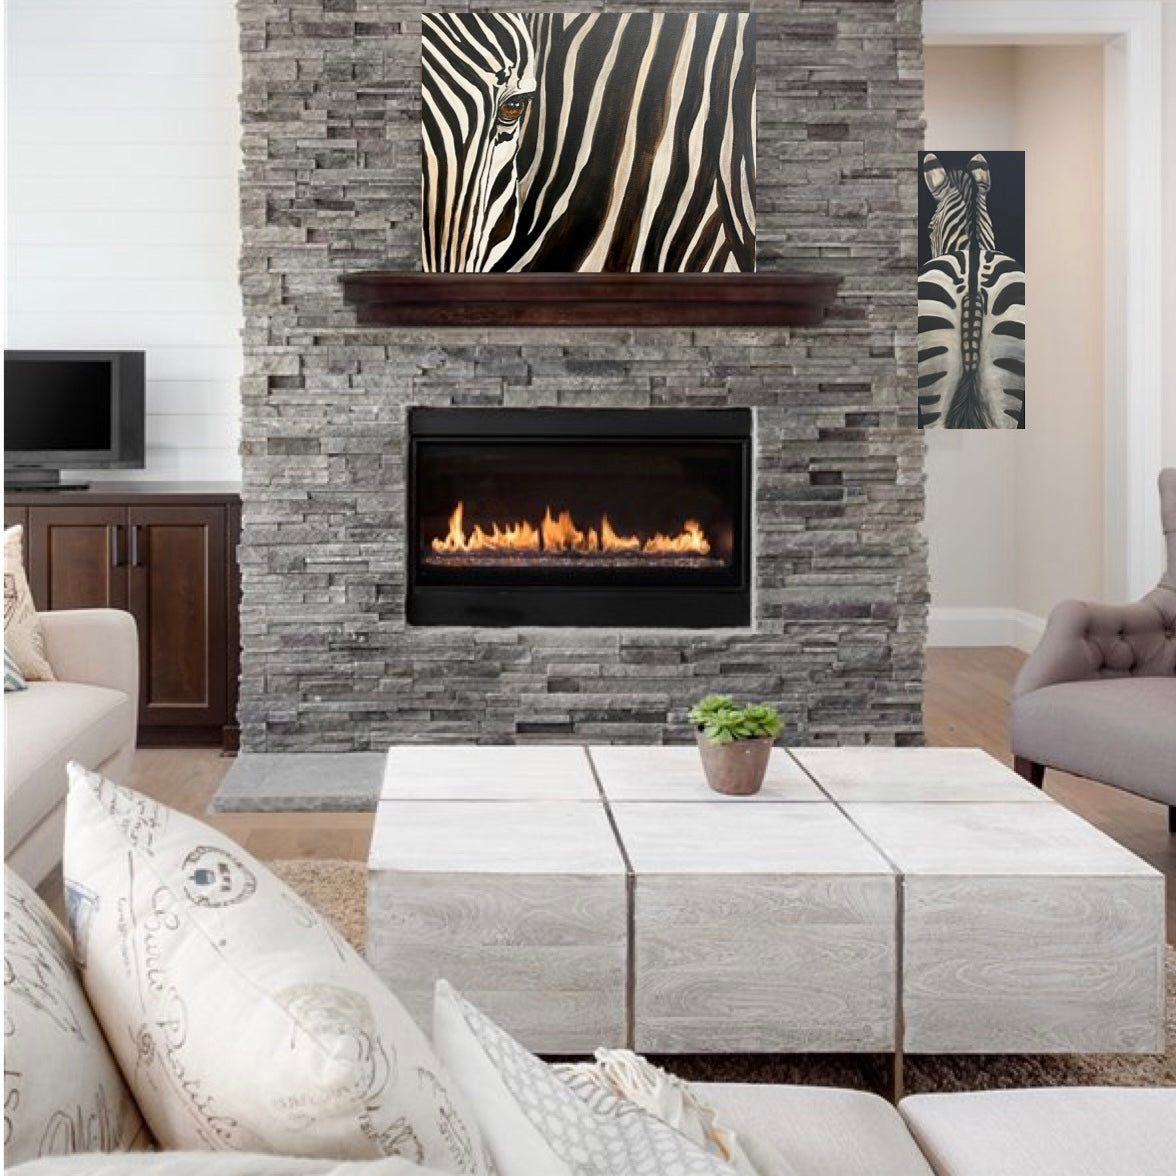 A zebra eye painting displayed above a warm fire on gray stone fireplace. A Zebra Tail painting hangs on back wall behind it to compliment the main piece. Both pieces painted by Terrinye.